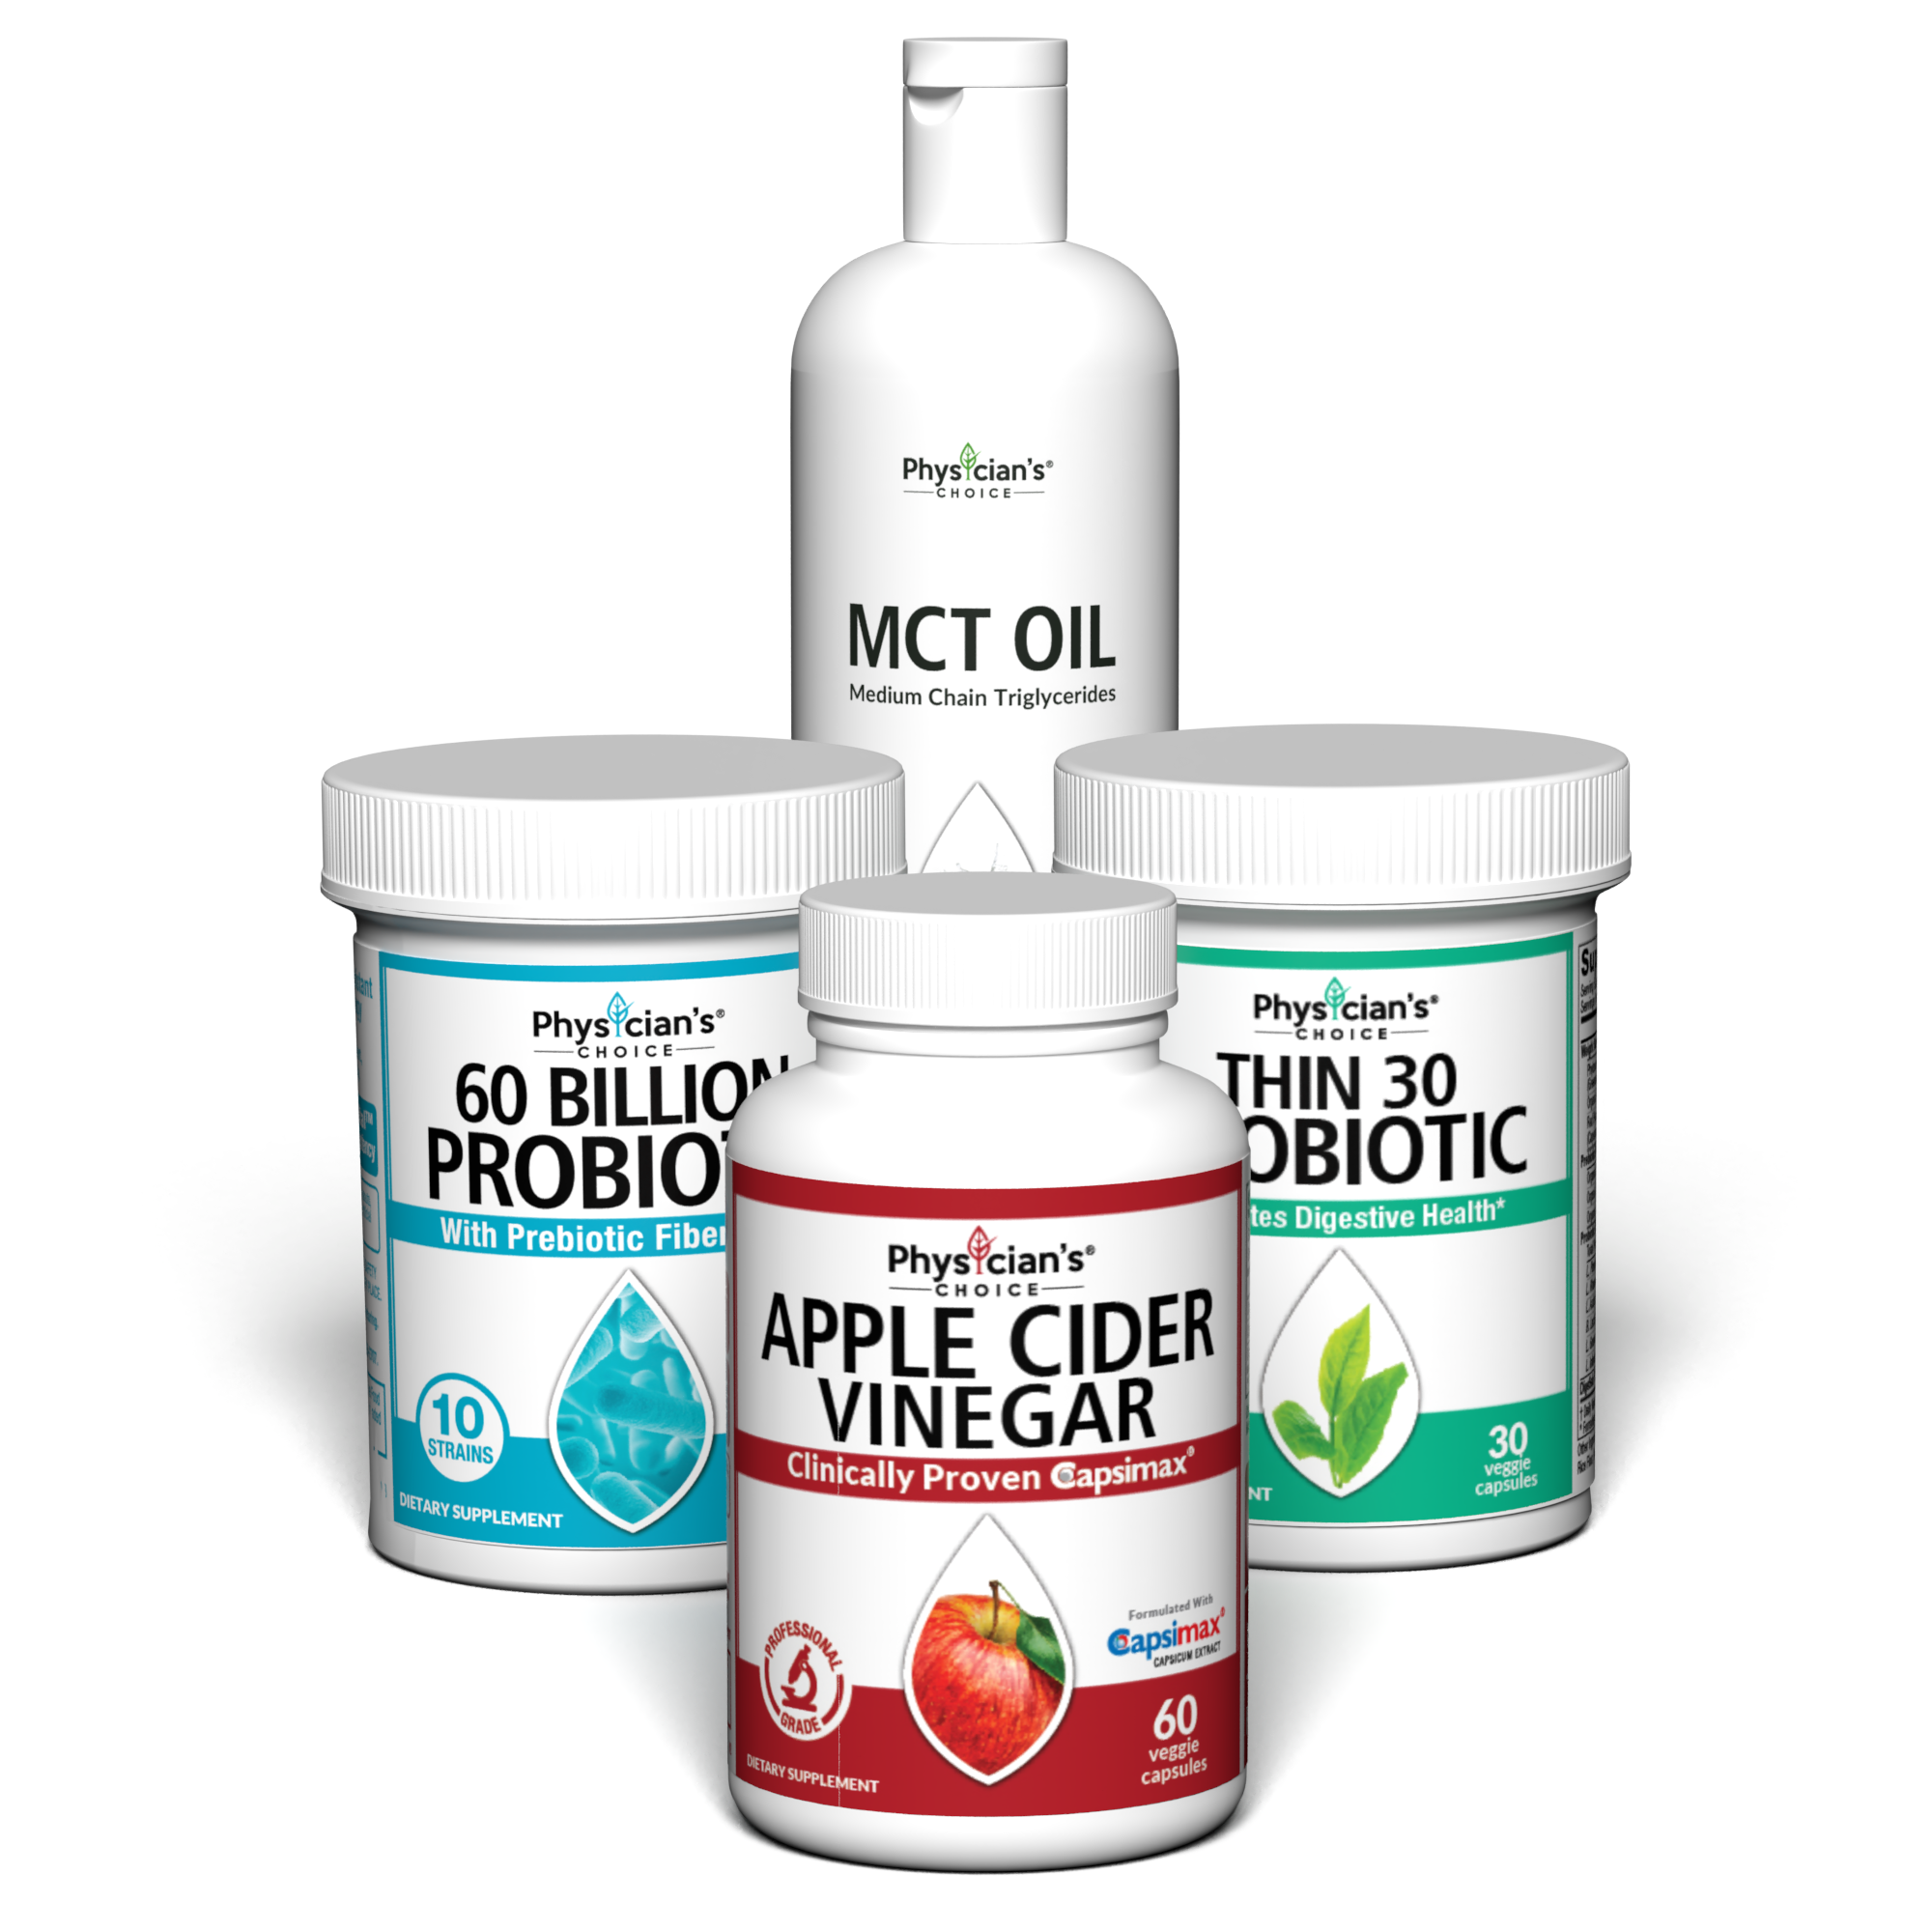 Healthy Weight and Diet Support Bundle with MCT Oil, Apple Cider Vinegar, Thin 30 Probiotic, and 60 Billion Probiotic